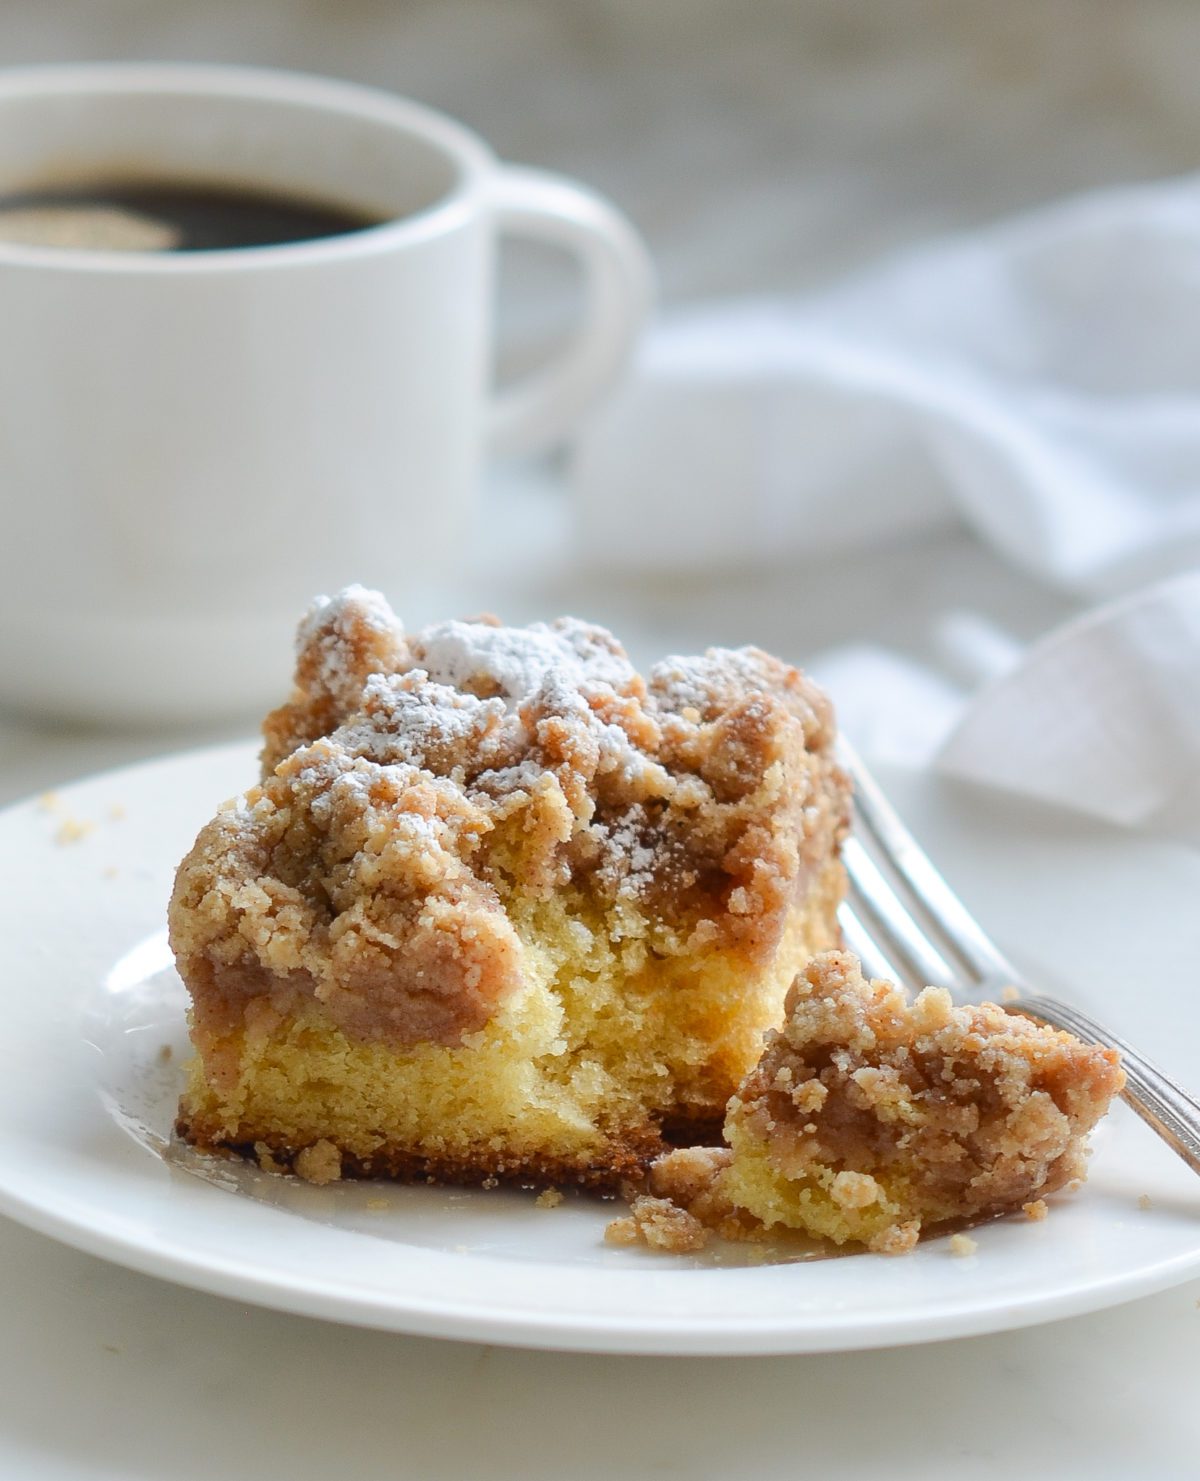 Aggregate more than 68 apple crumble cake bbc latest - awesomeenglish.edu.vn